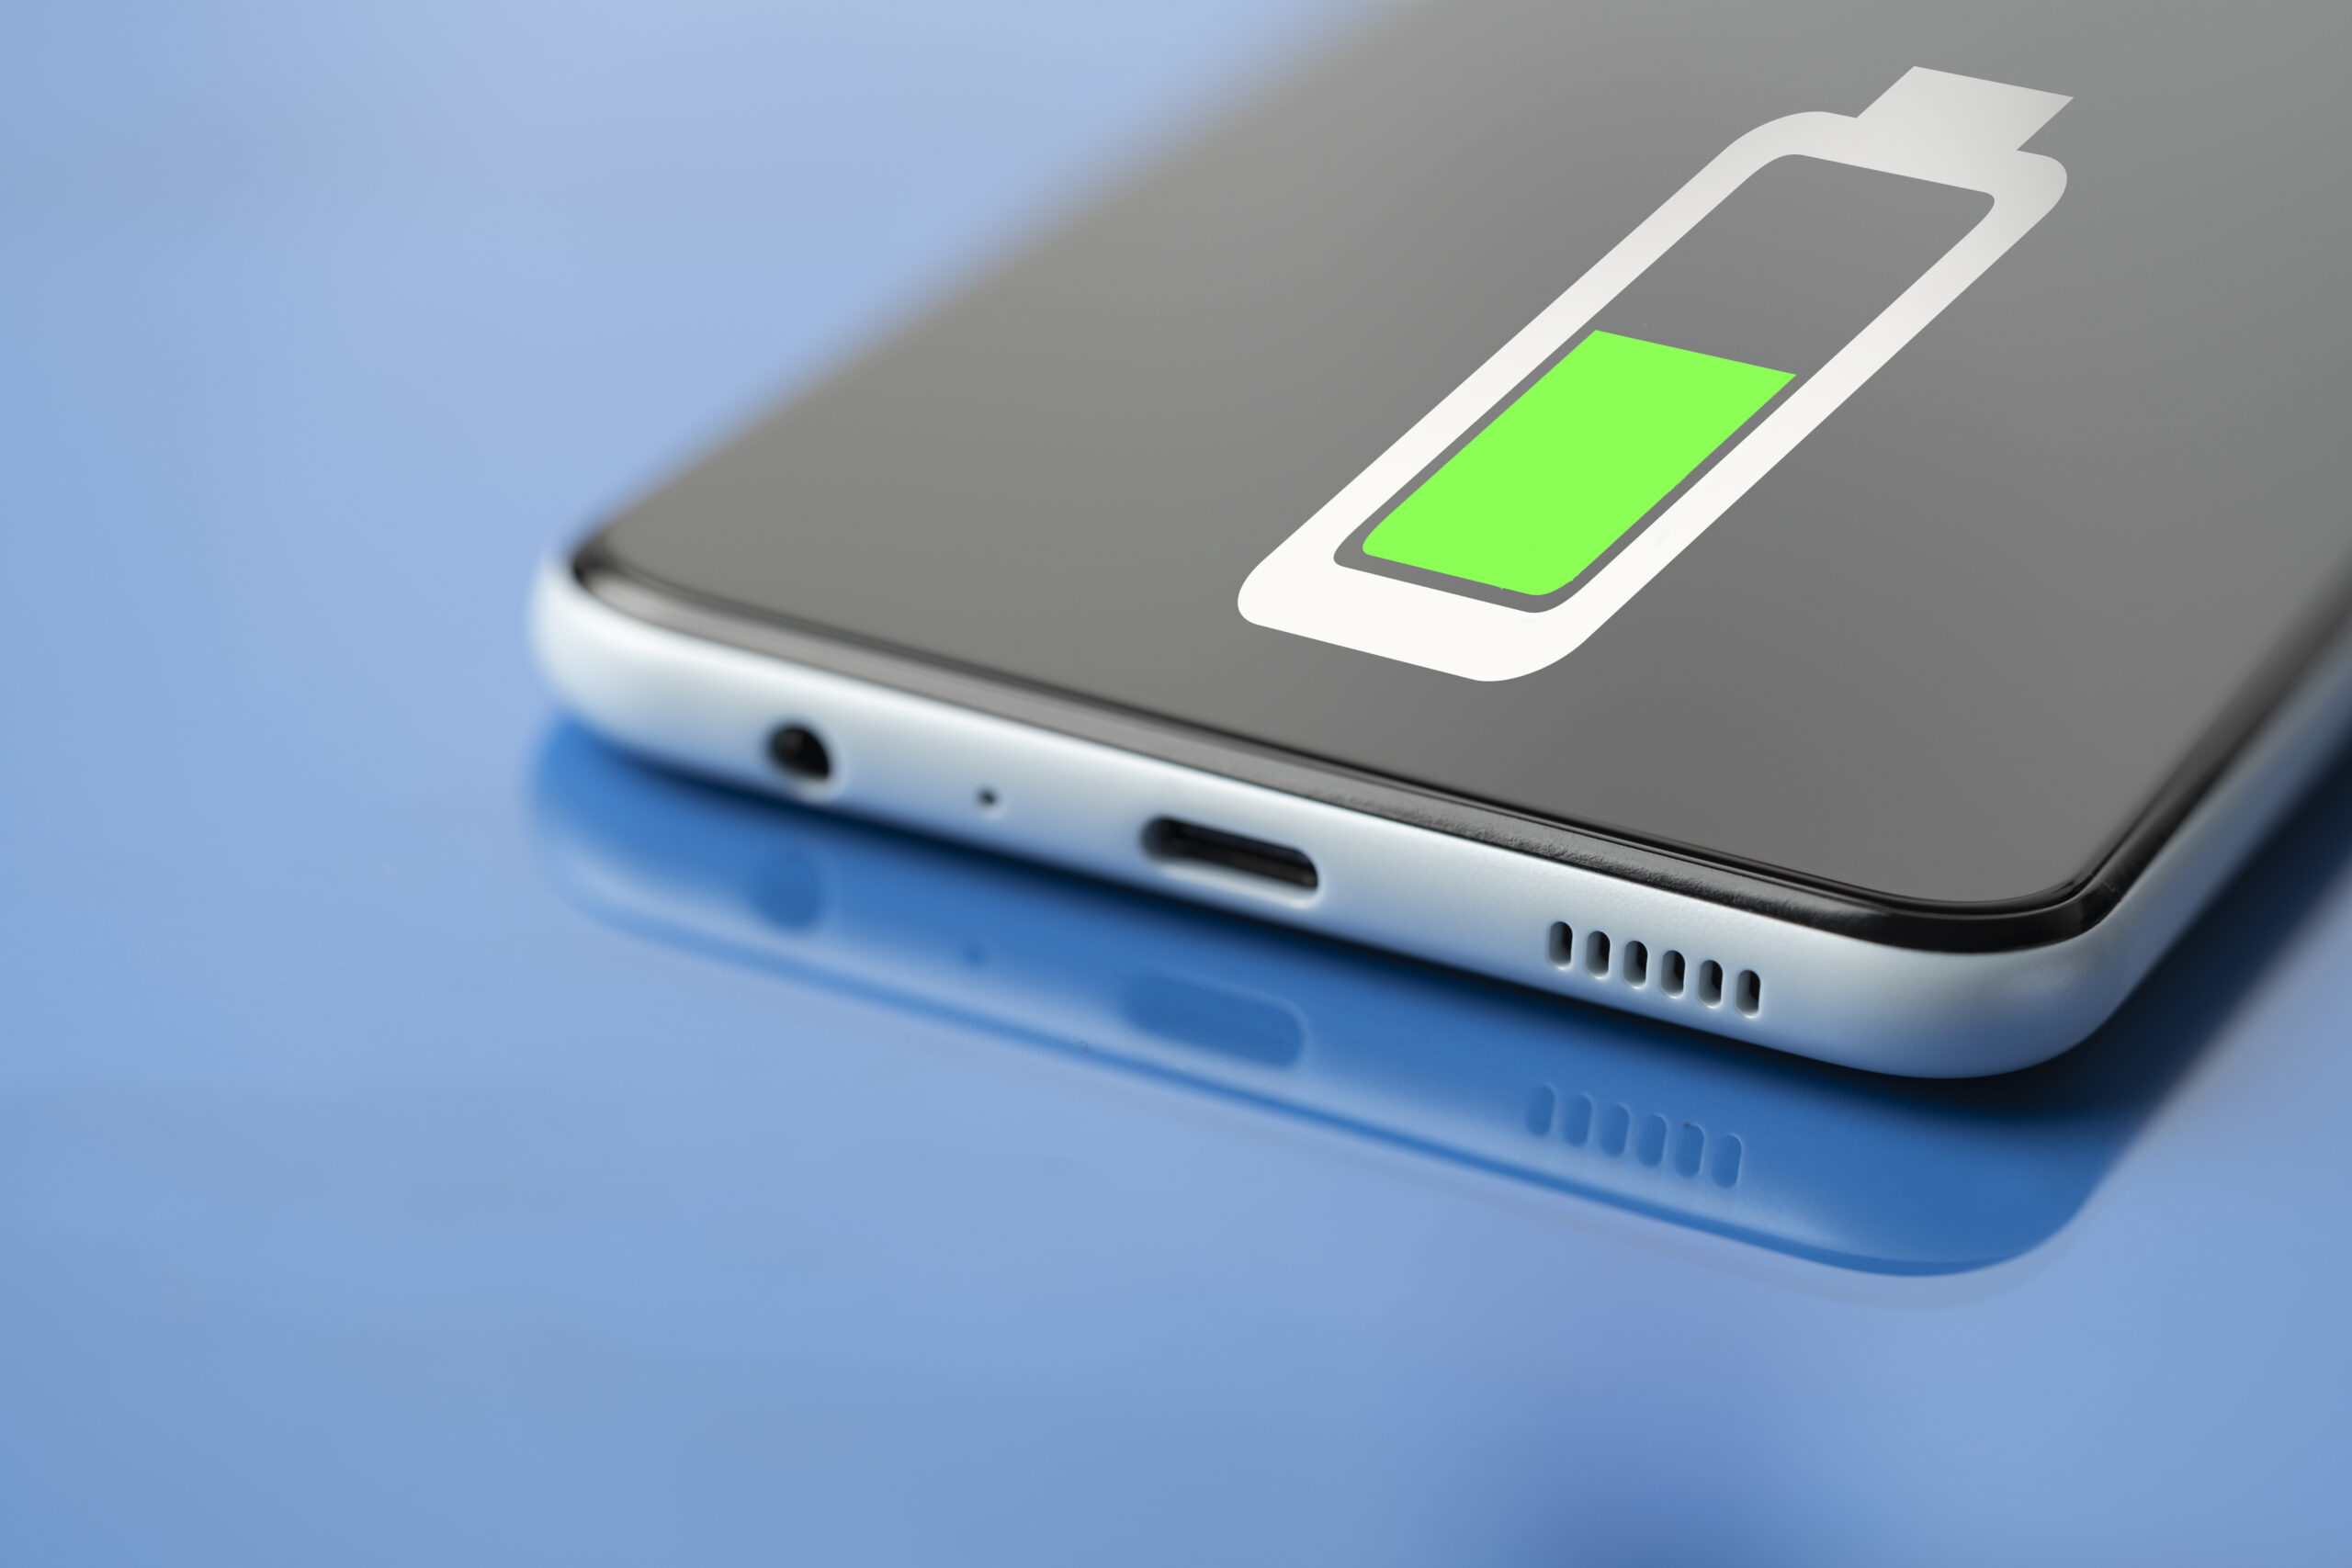 Phone battery charge optimal level